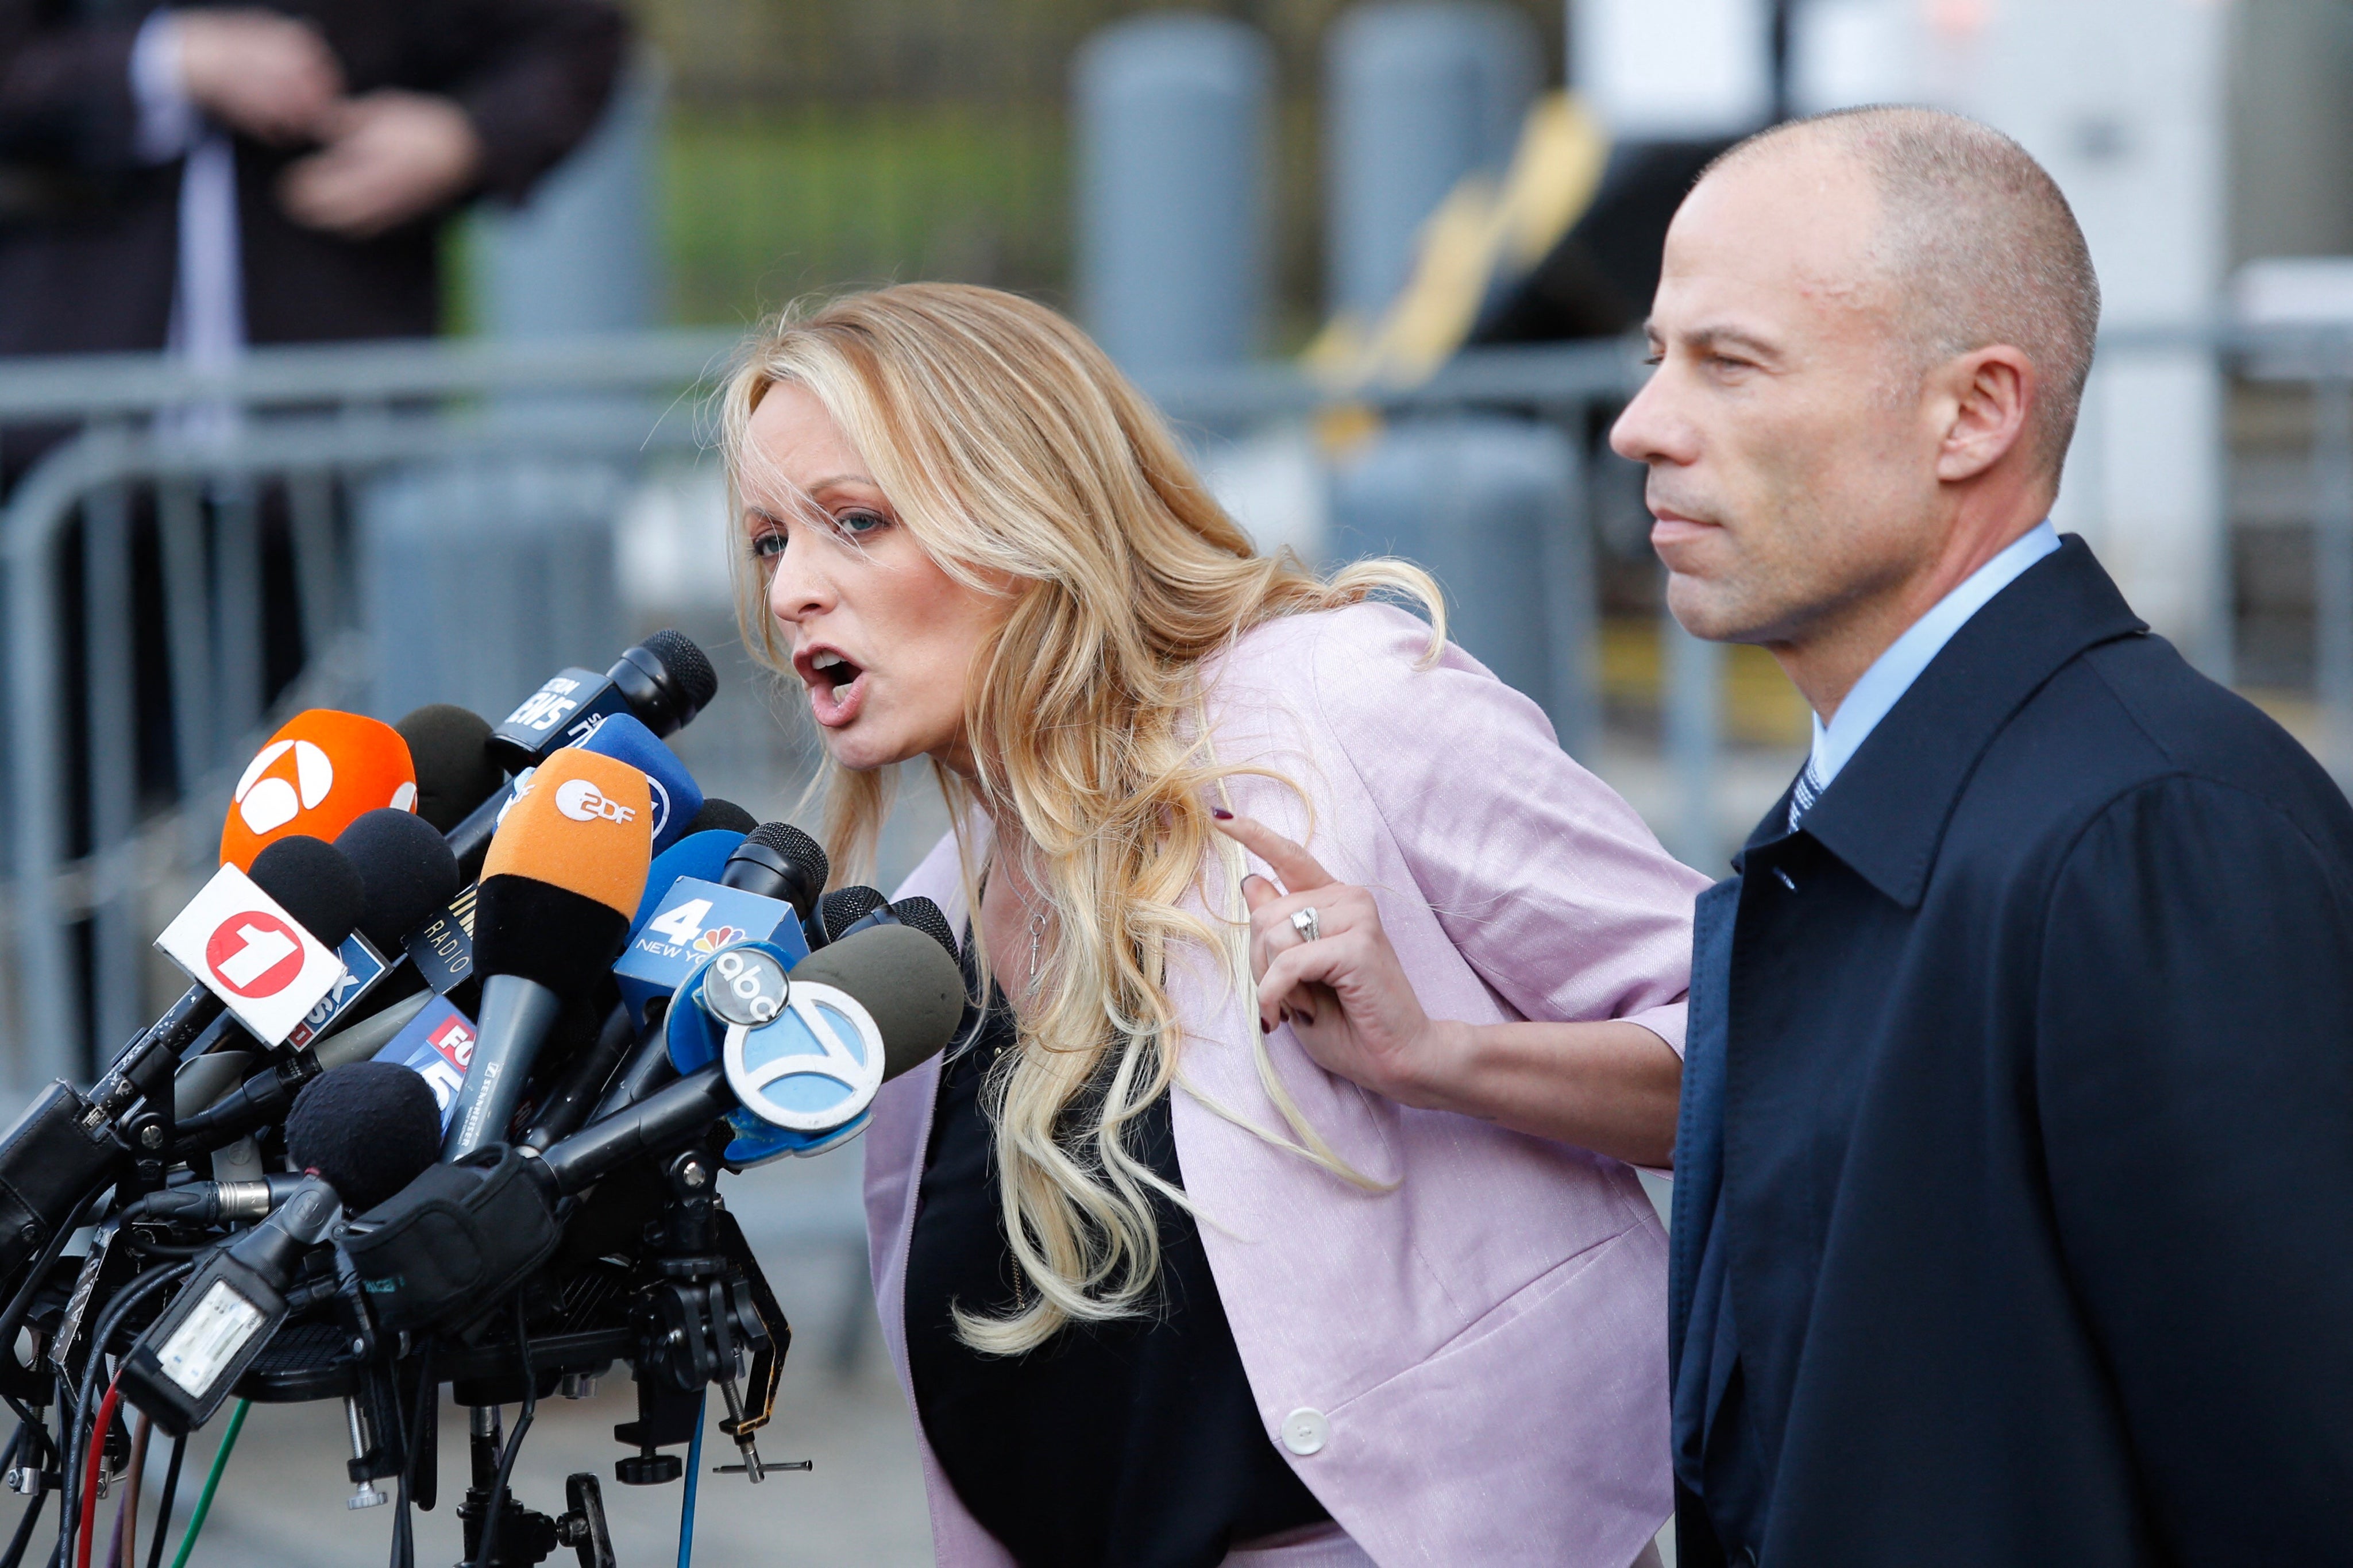 Adult film actor Stephanie Clifford, also known as Stormy Daniels, speaks outside US Federal Court with her then-lawyer Michael Avenatti in 2018